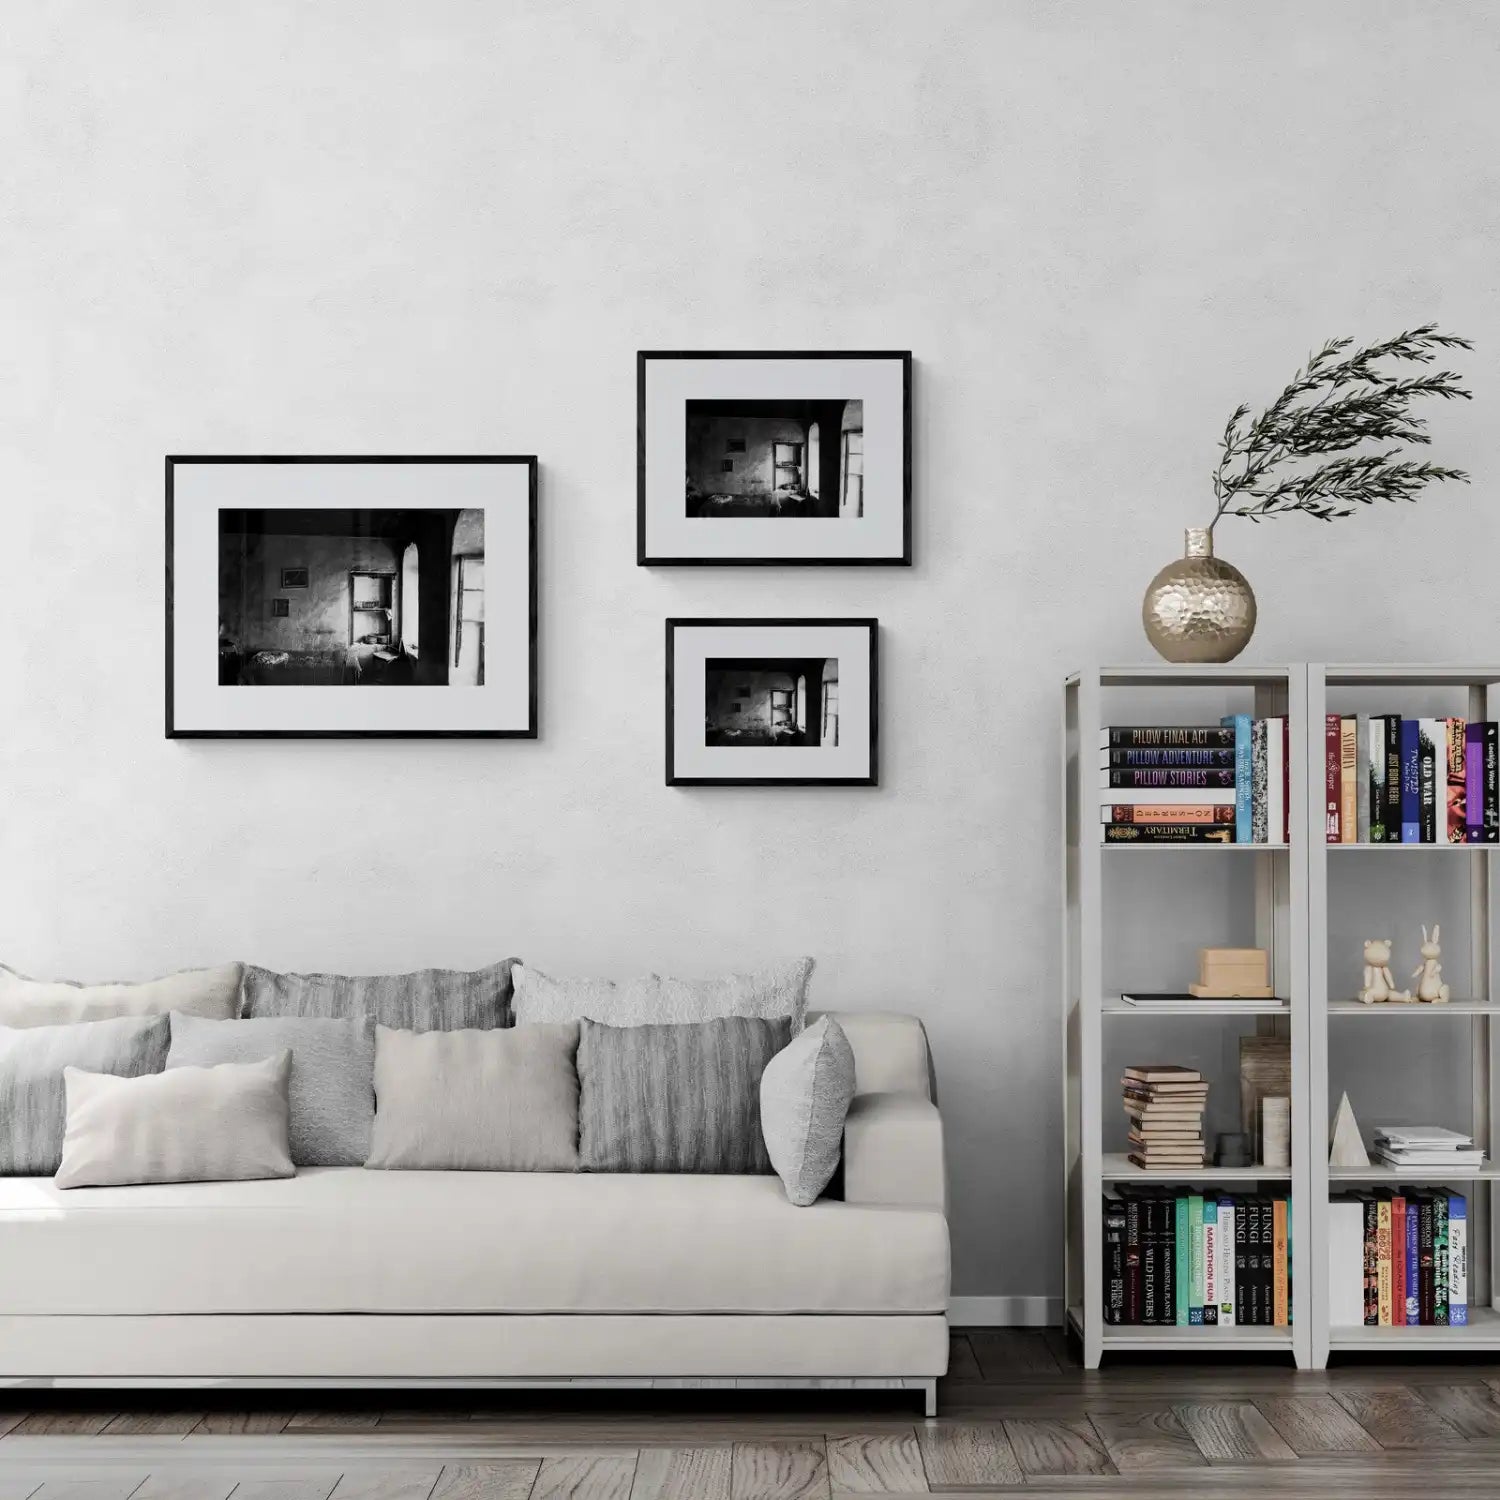 Filiates, Thesprotia, Epirus, Greece | Bedroom Interior | Black-and-White Wall Art Photography - framing options